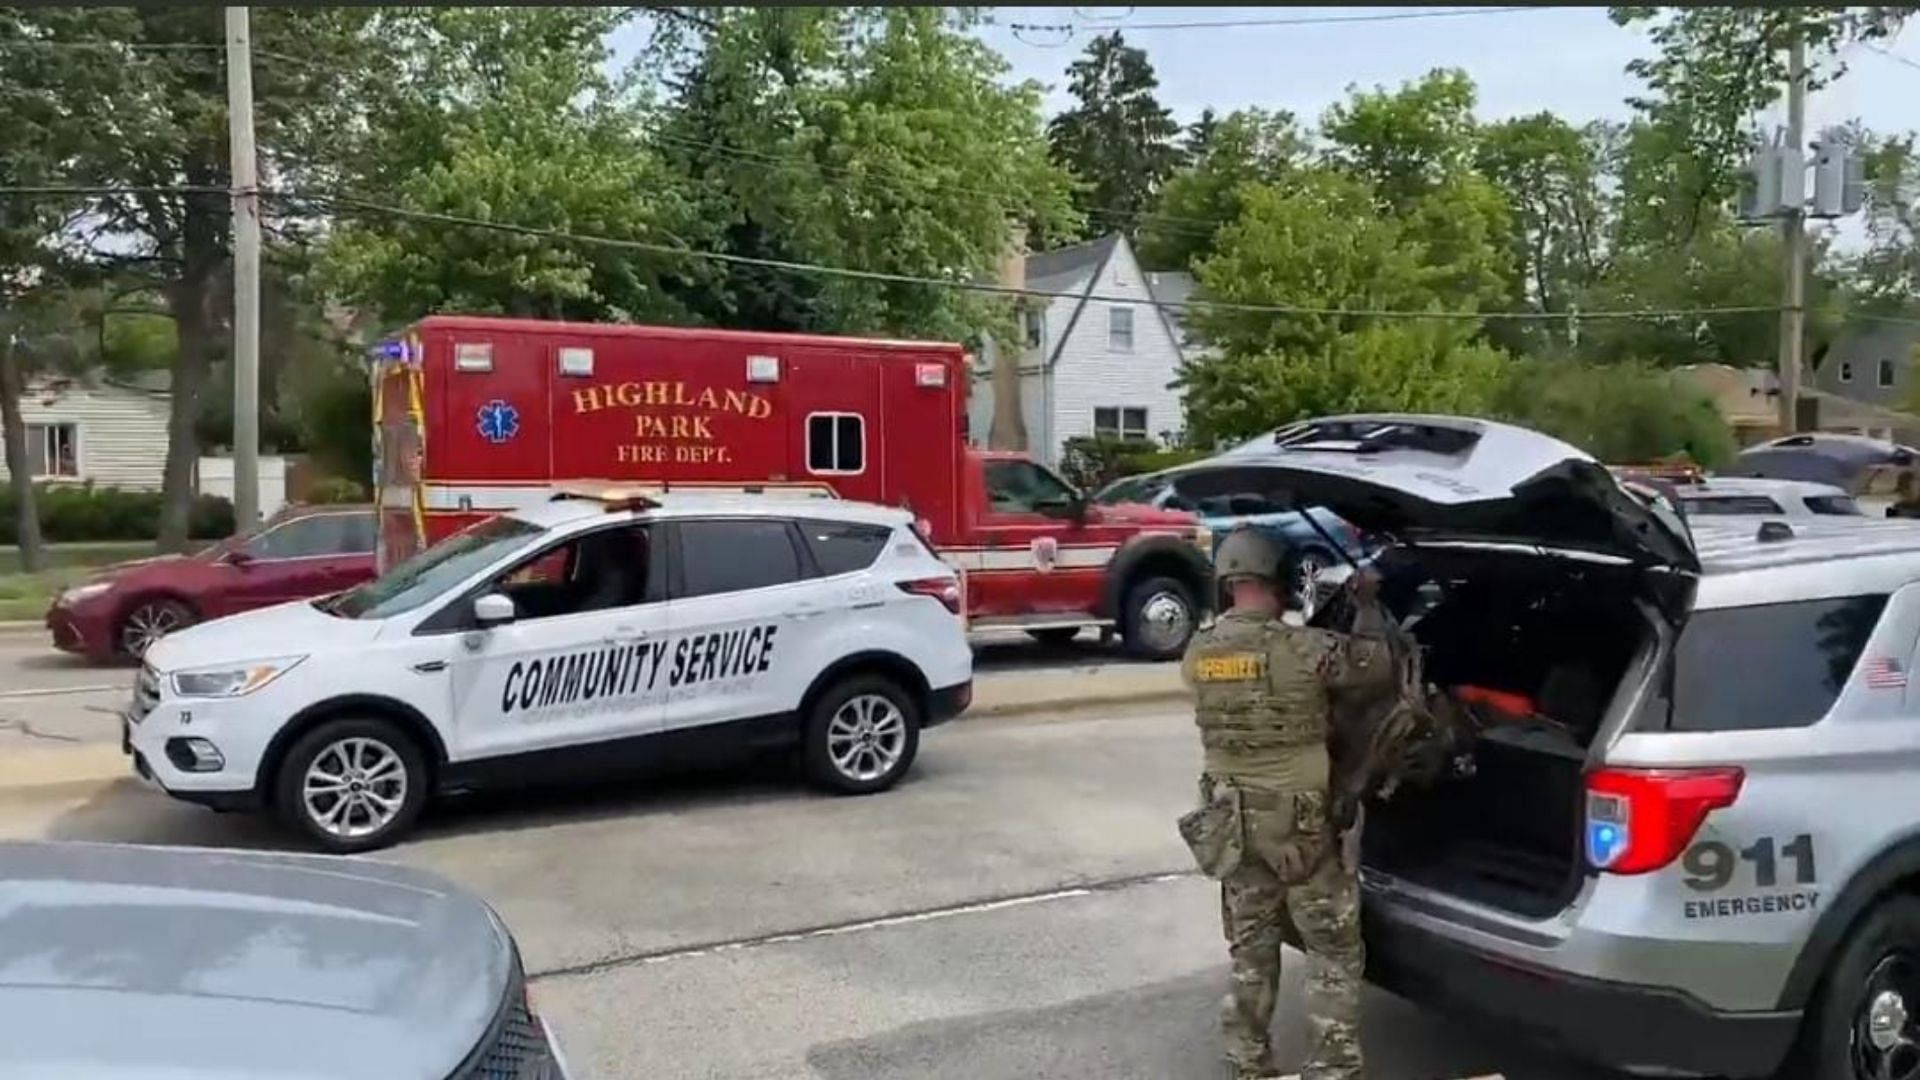 At least five were killed, and several were injured in a mass shooting in Highland Park, Illinois (Image via Twitter @/JournoSiddhant)